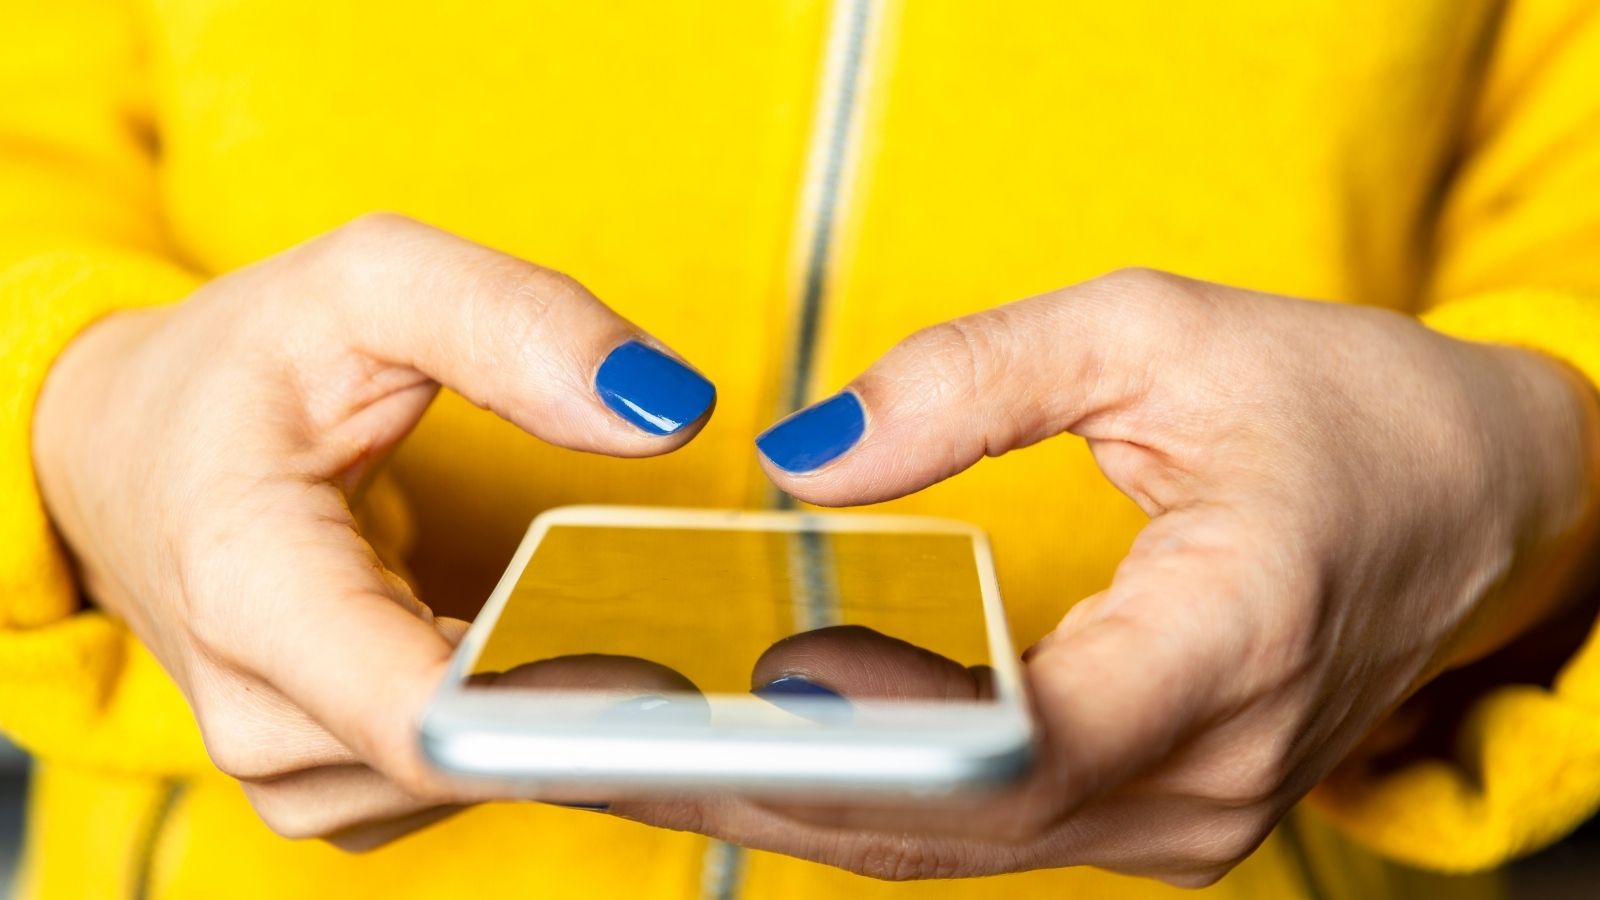 woman wearing yellow sweater with blue nails holding iphone